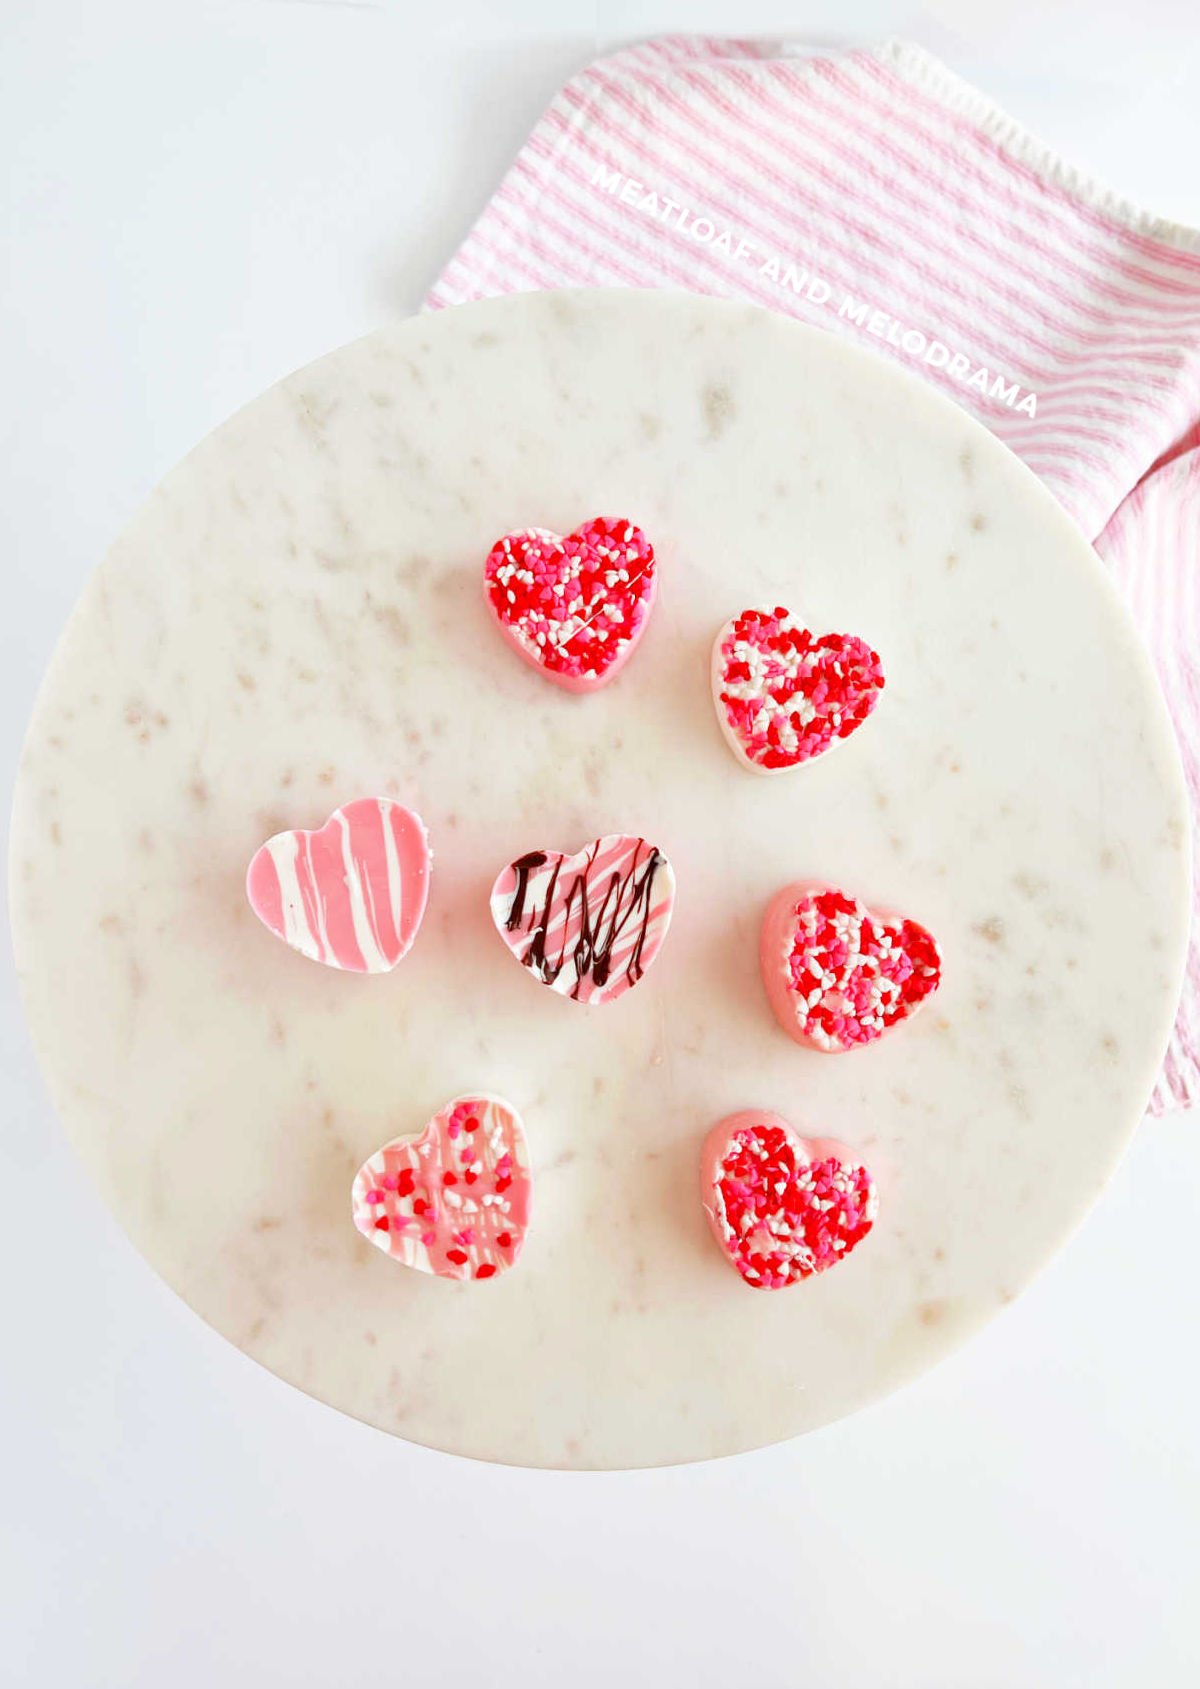 homemade white chocolate candy hearts decorated for valentine's day